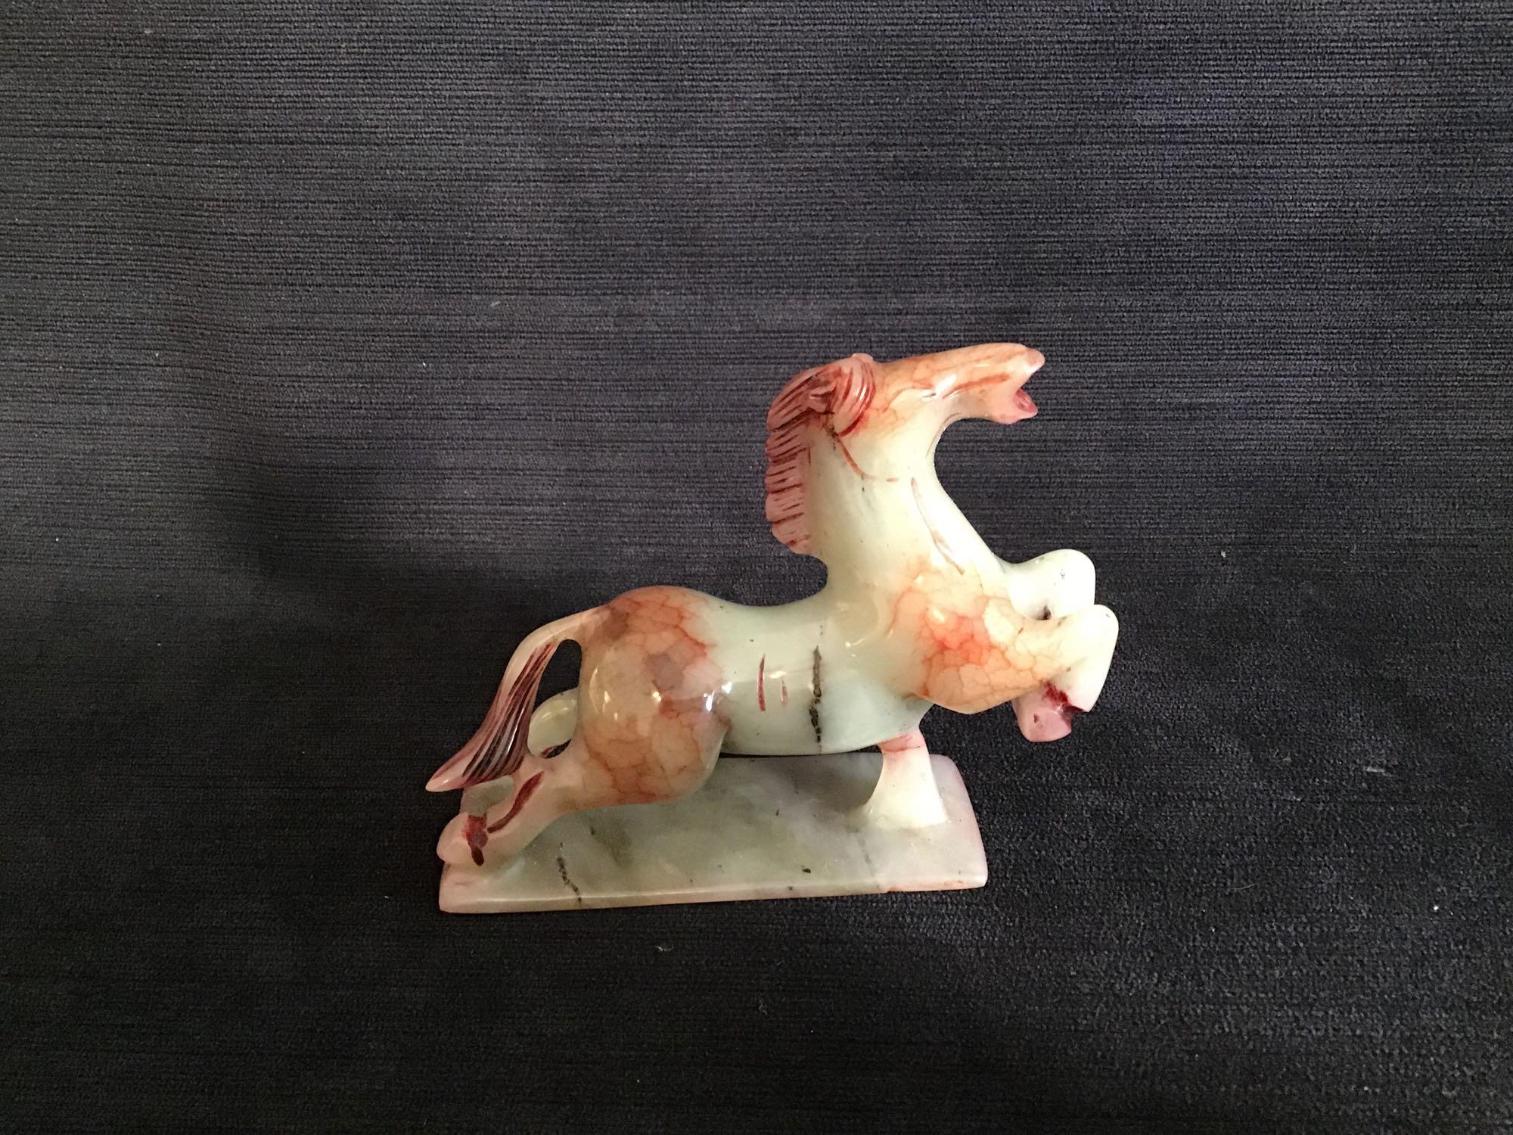 Image for Six Soap Stone Carved Horses